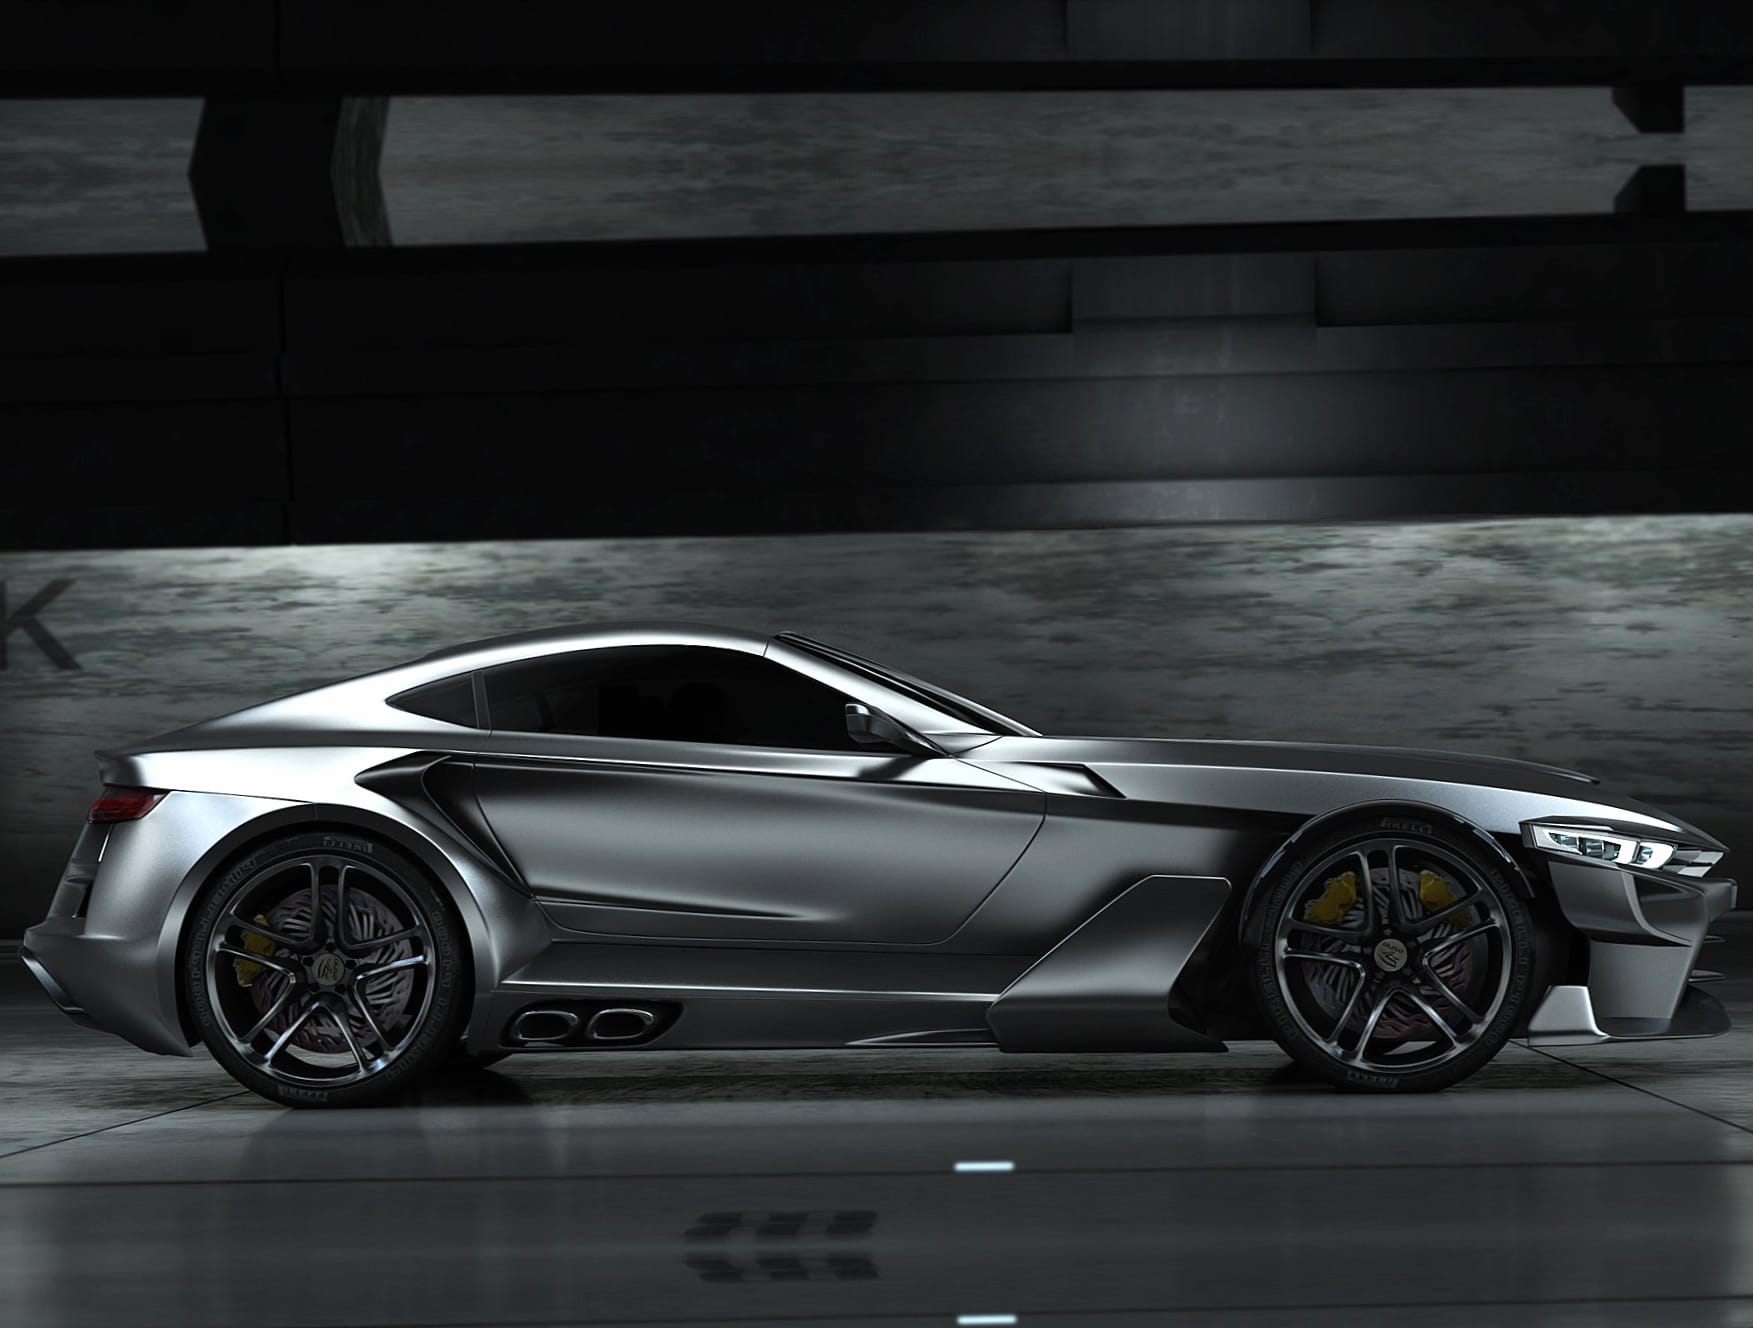 Aspid GT-21 Invictus wallpapers HD quality